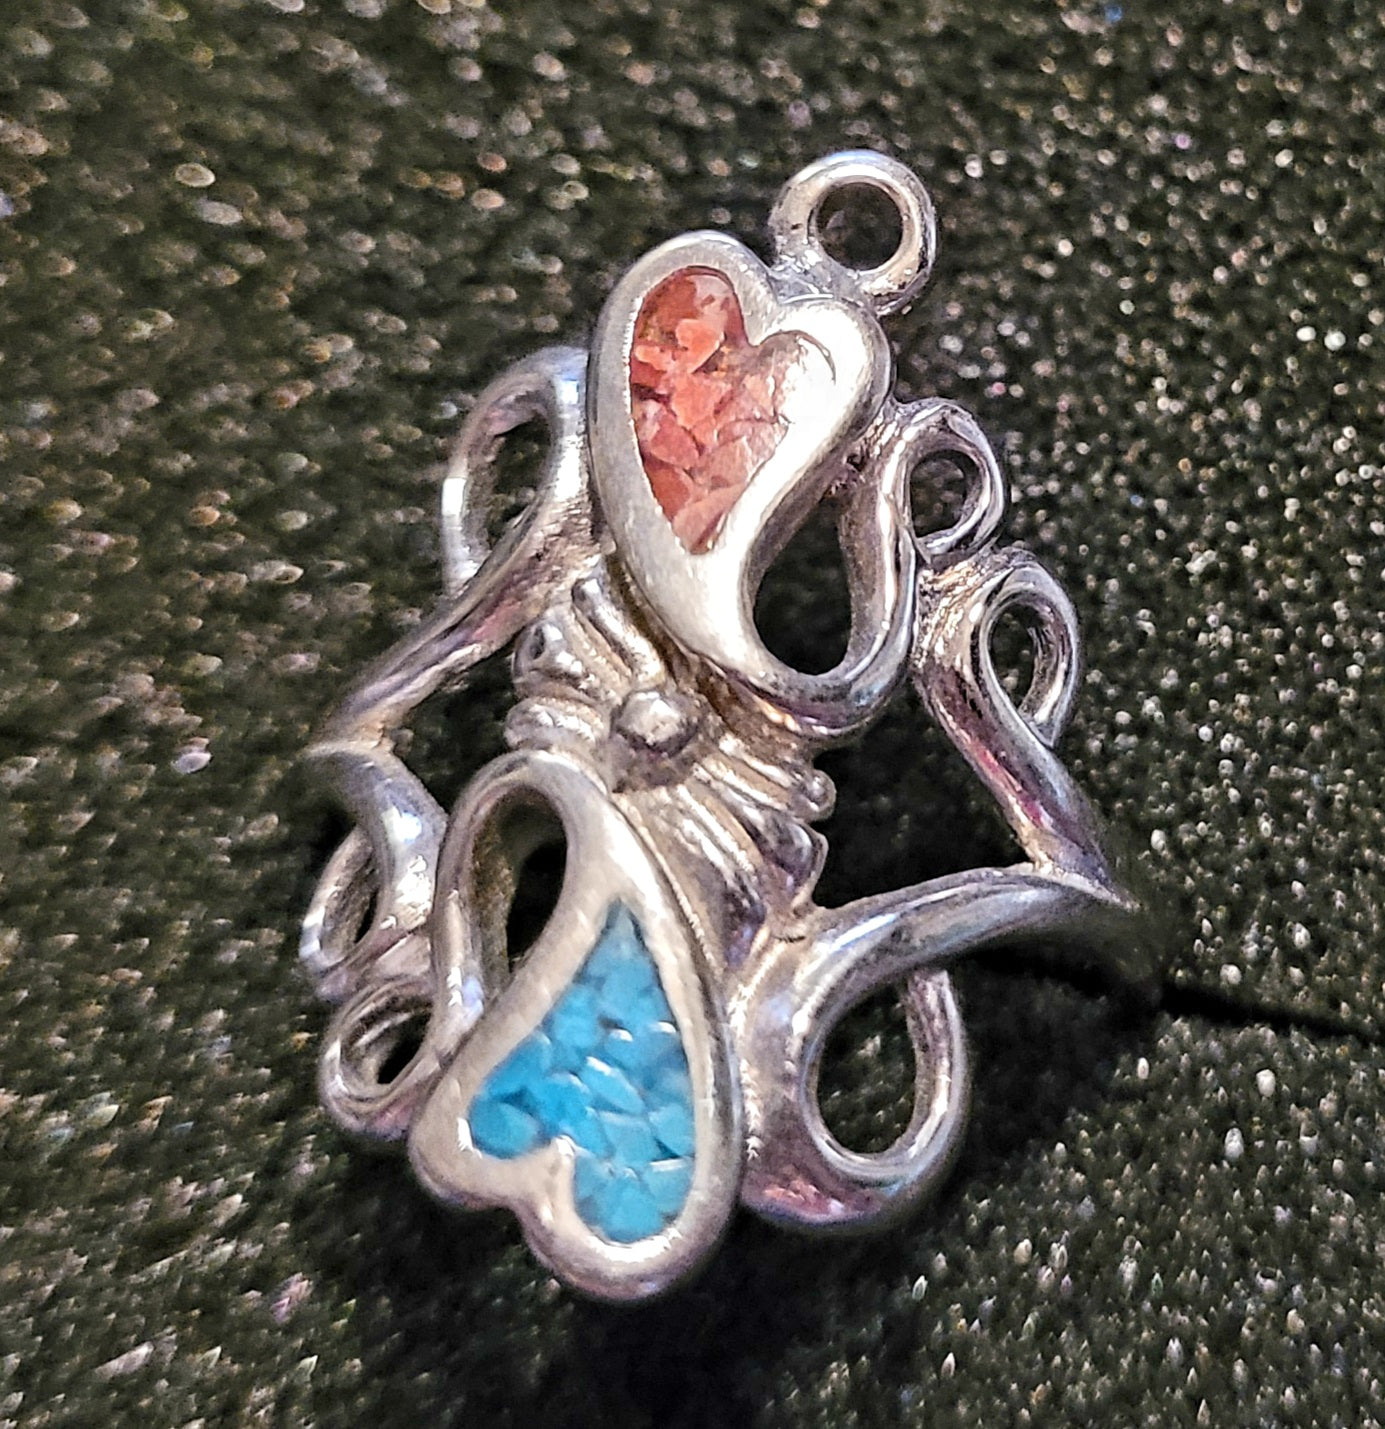 Swirls & Scrolls Hearts Ring w/ Turquoise/Coral Inlay (Size 7.5)